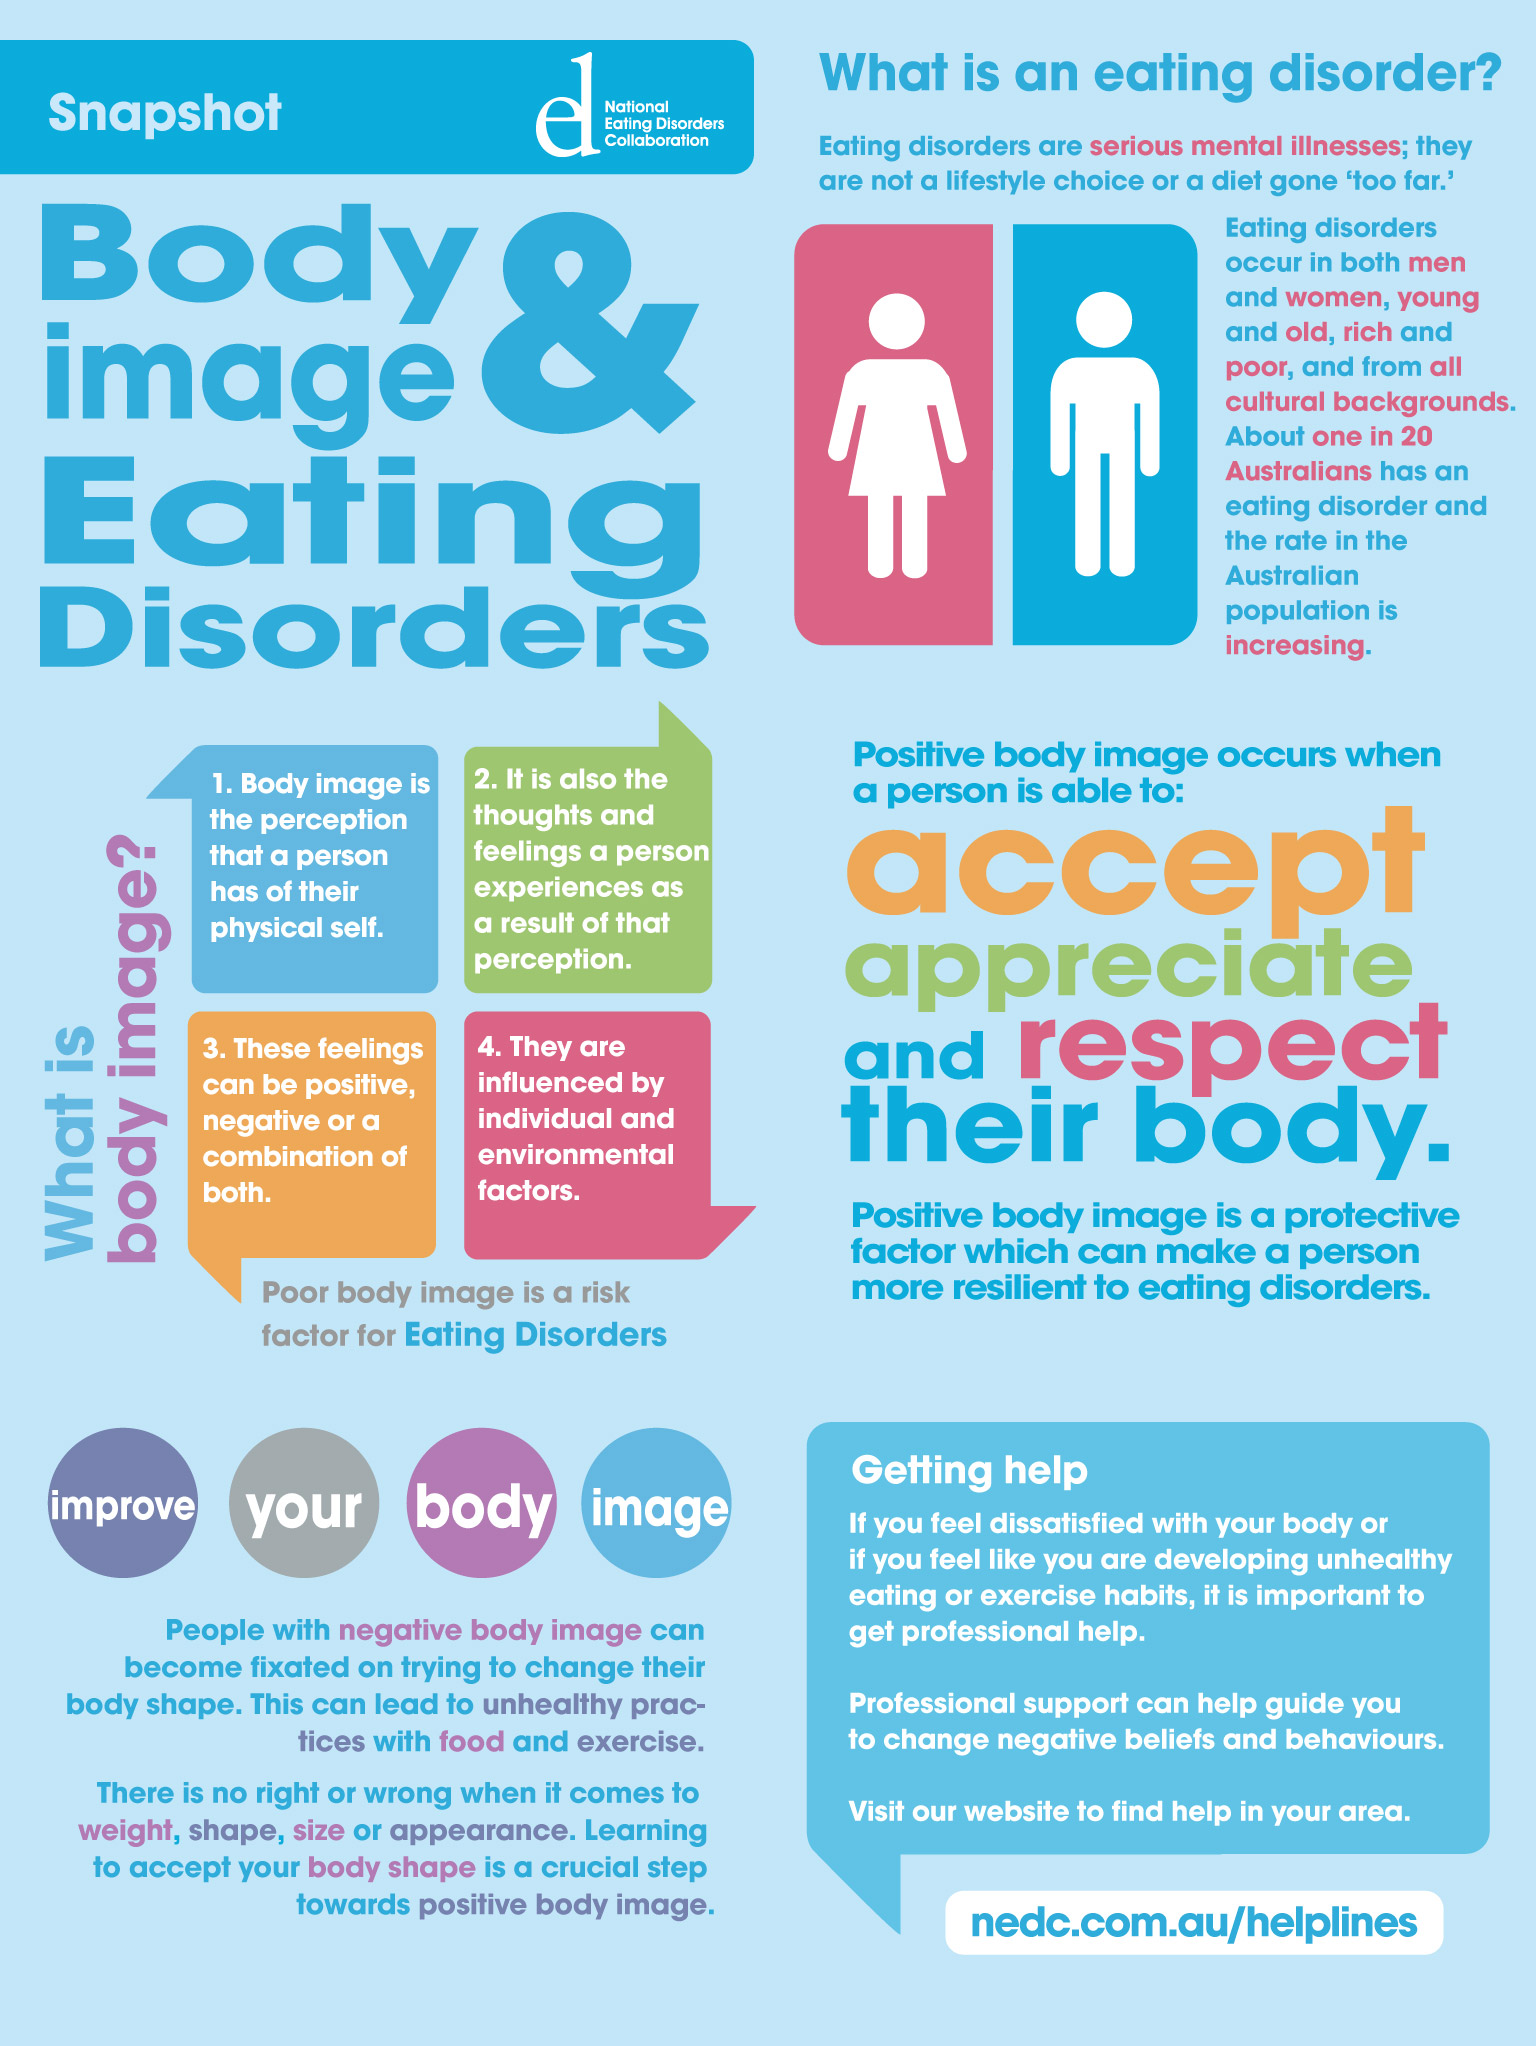 eating-disorders-are-serious-mental-illnesses-they-are-not-a-lifestyle